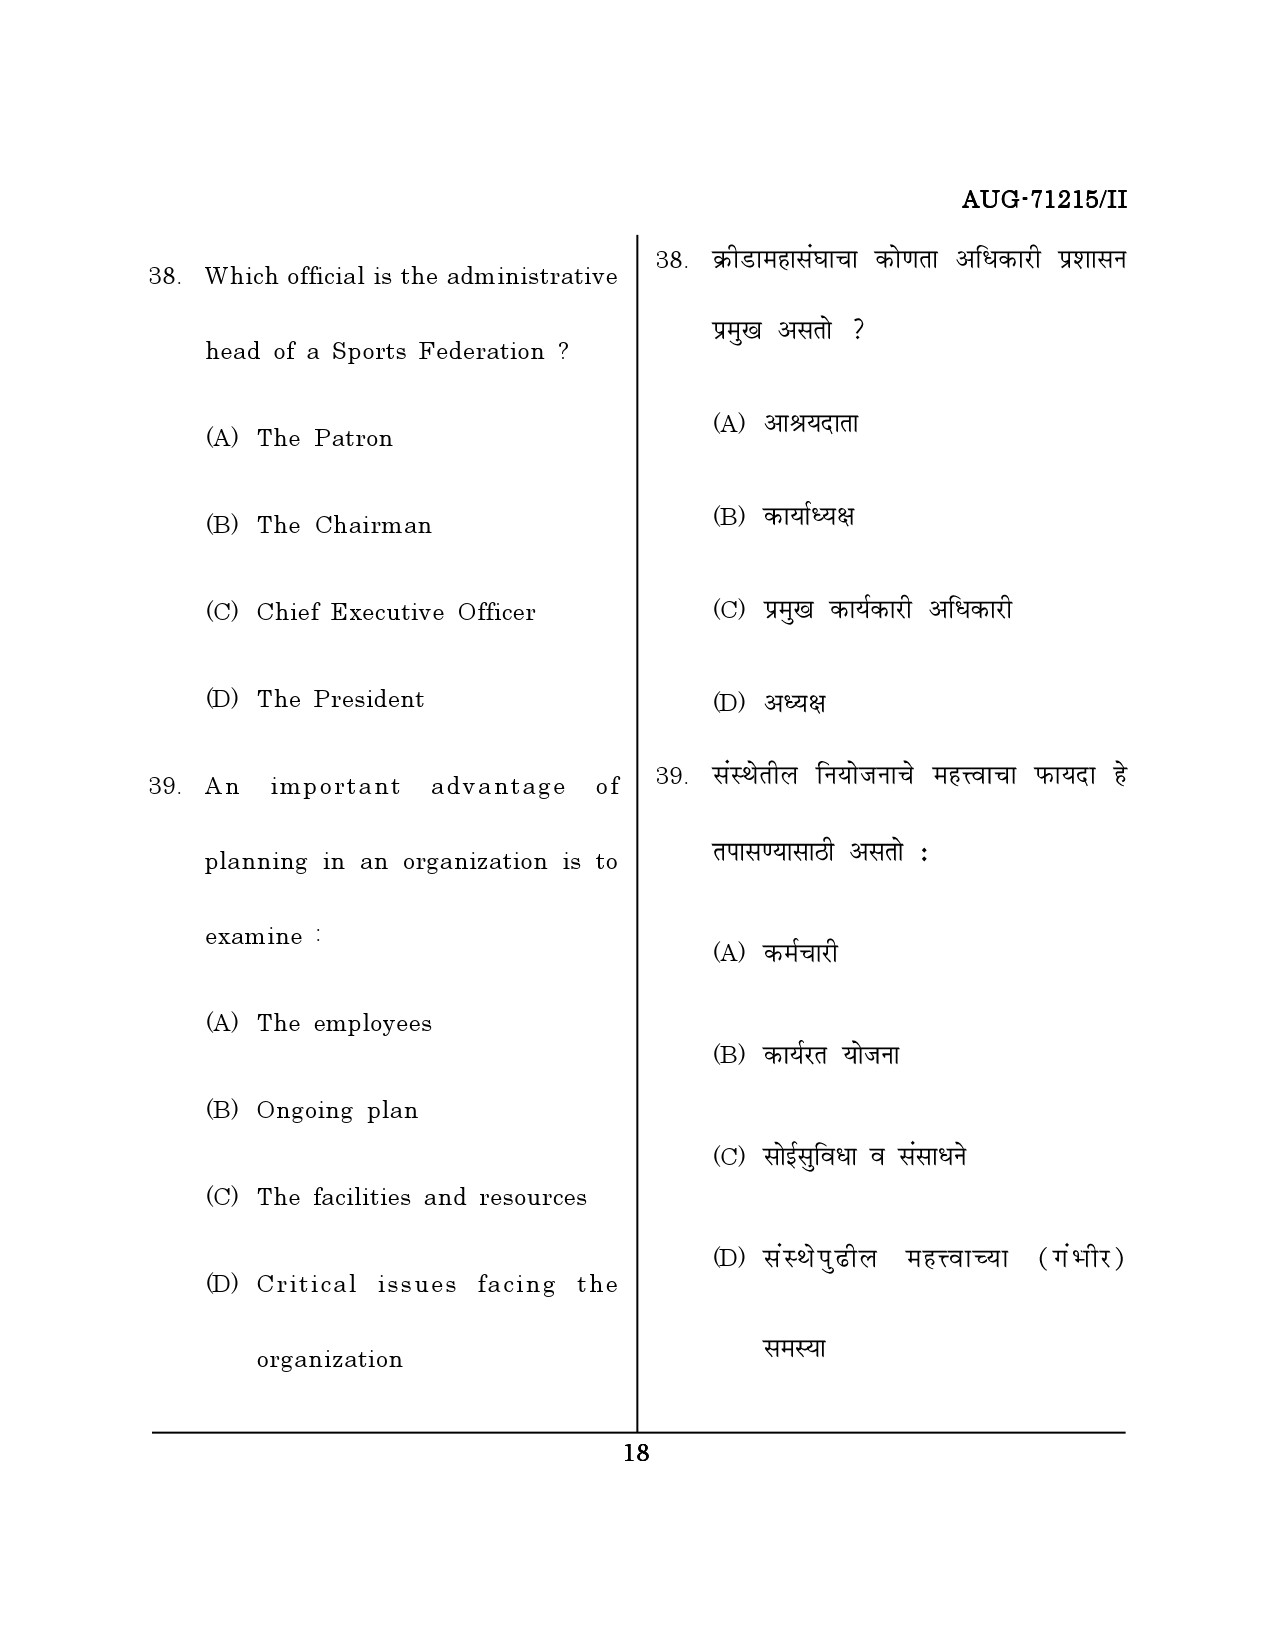 Maharashtra SET Physical Education Question Paper II August 2015 17